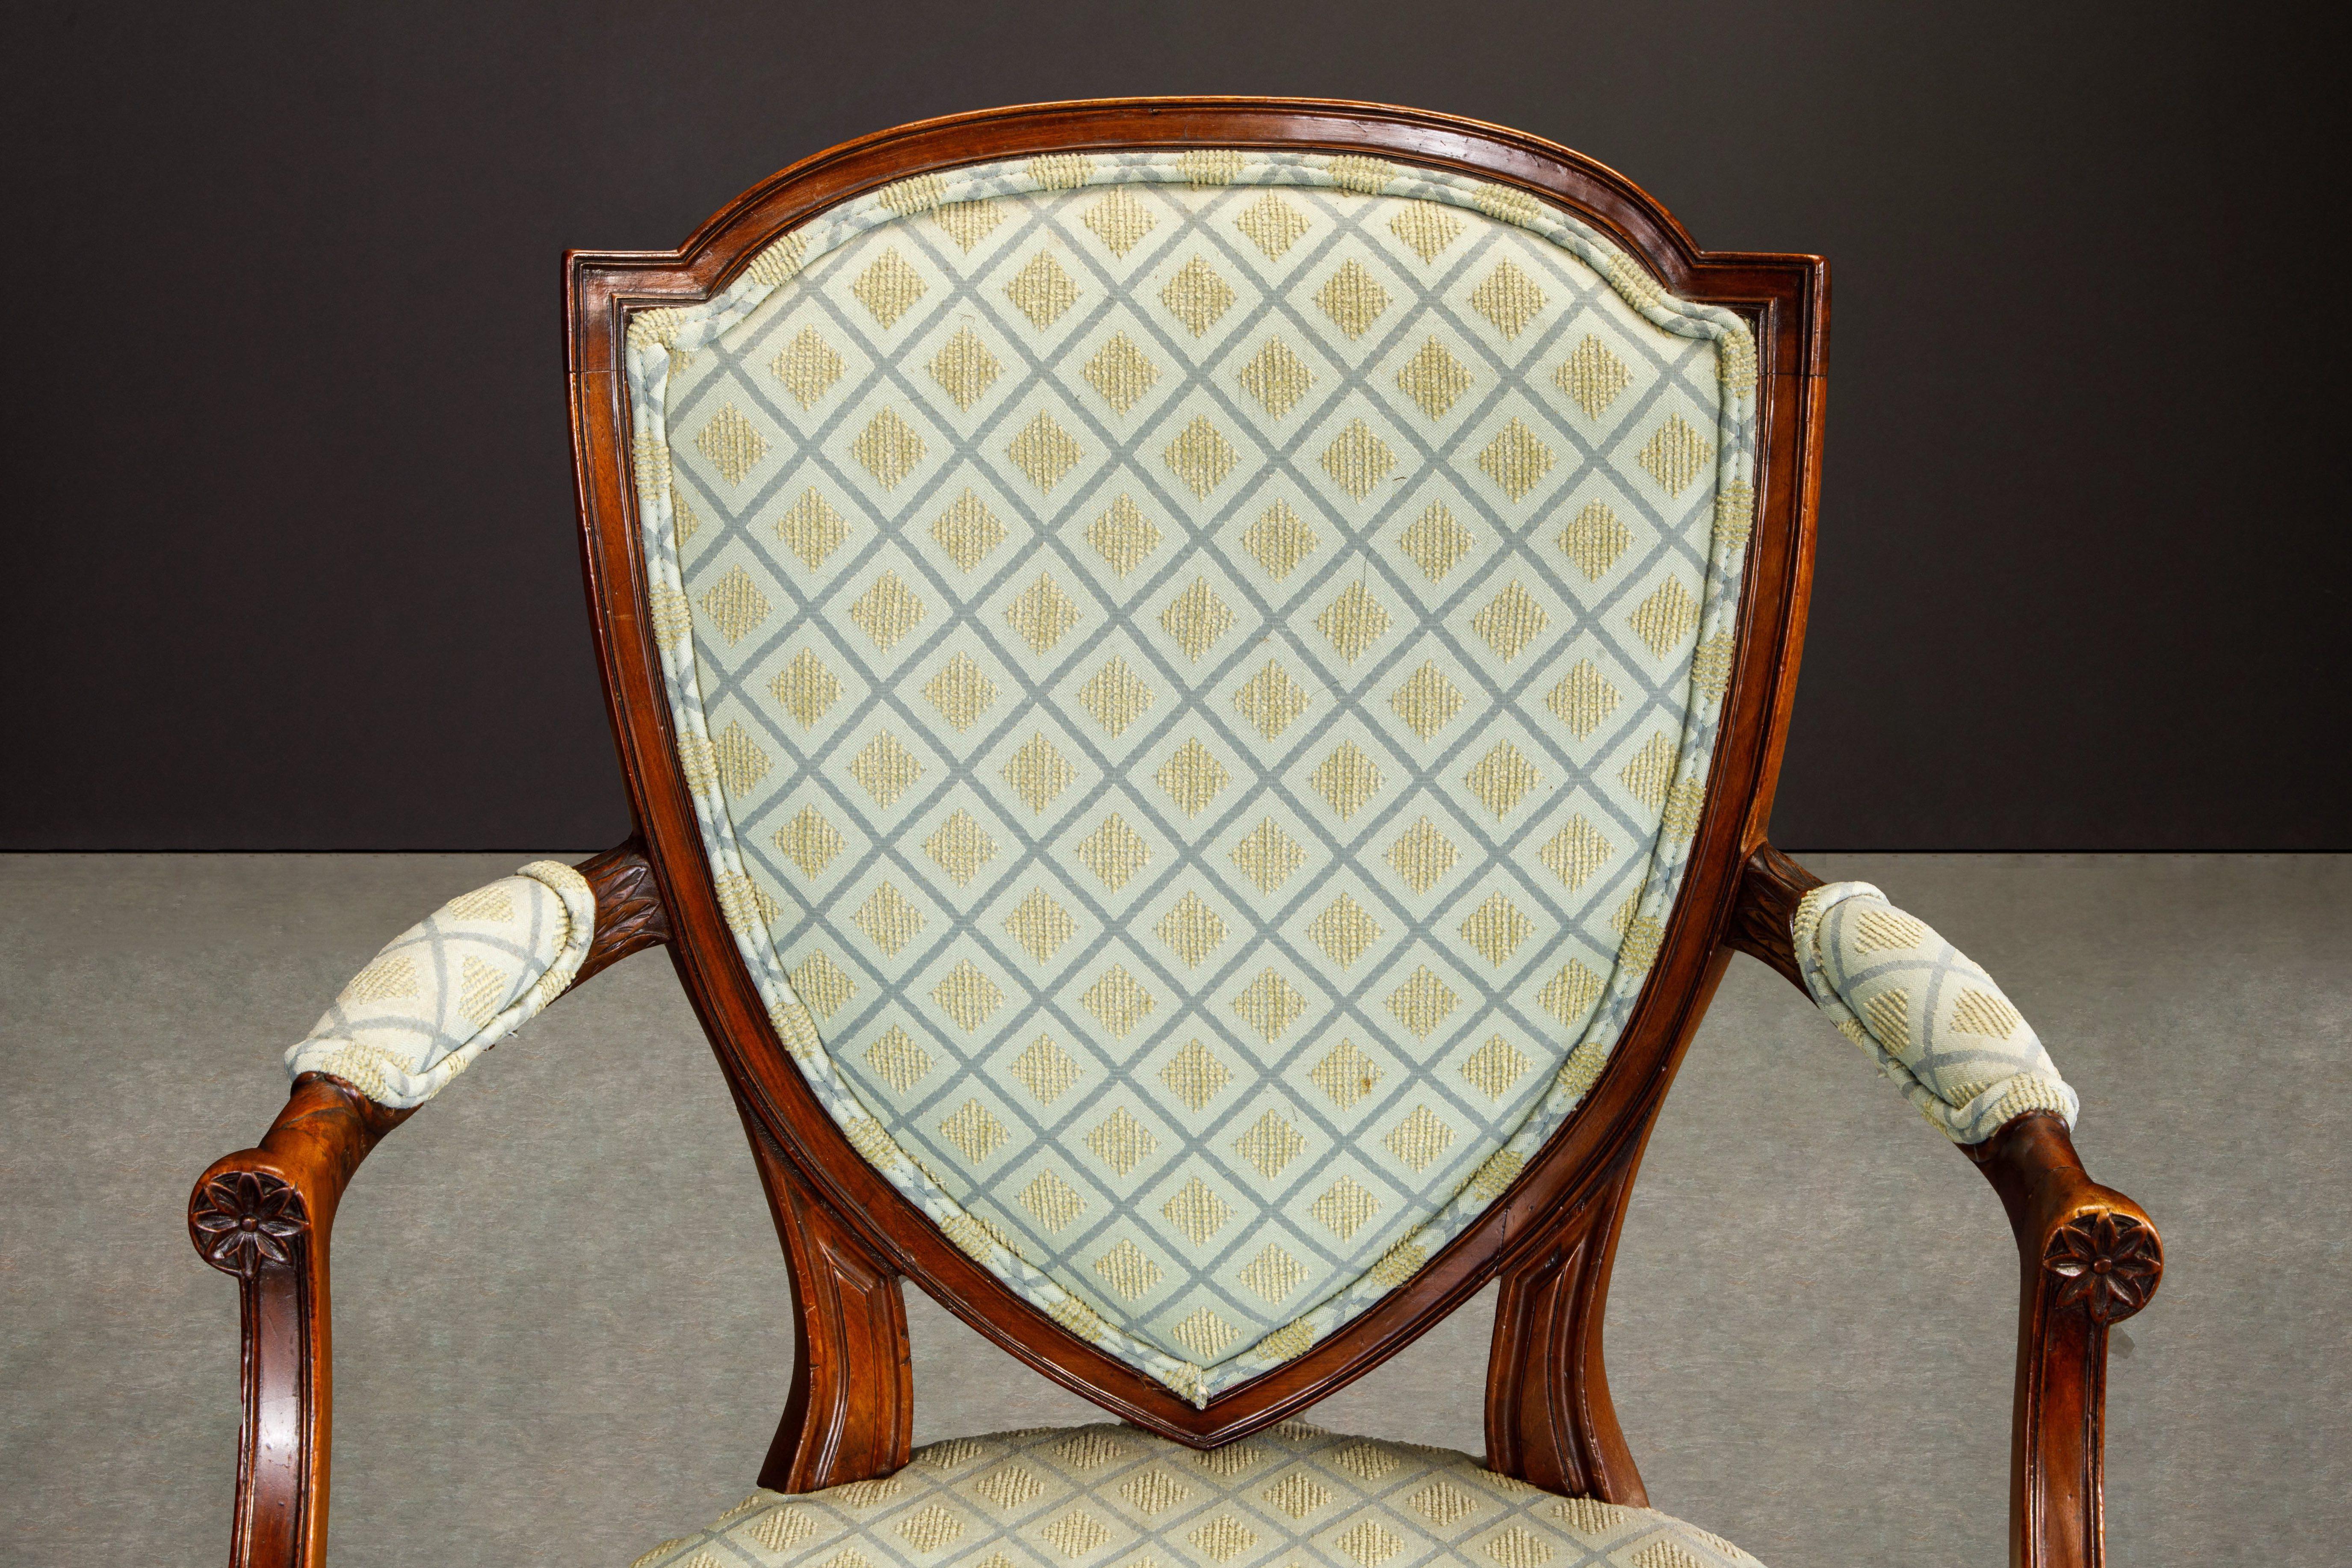 Pair of Upholstered Hepplewhite Shield-Back Armchairs w Provenance, circa 1870s For Sale 10